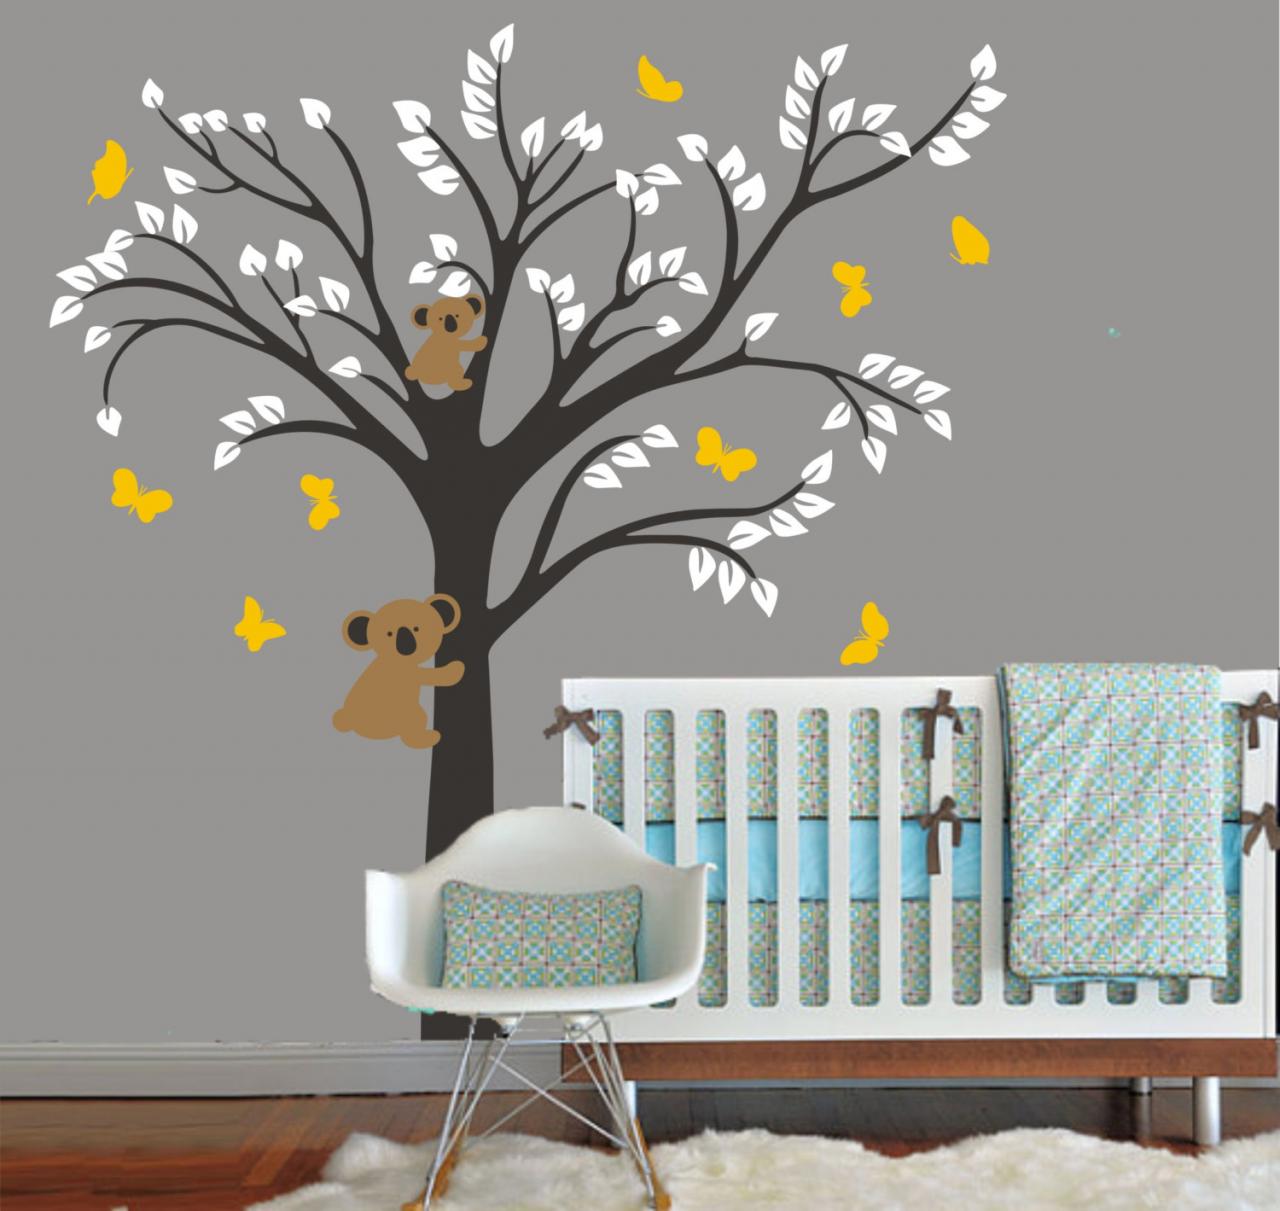 Vinyl Wall Decal Simple Tree With Cute Bears Playing Butterfly Cubs Art Home Decals Wall Sticker Stickers Kids Room Bed Baby Removable R841